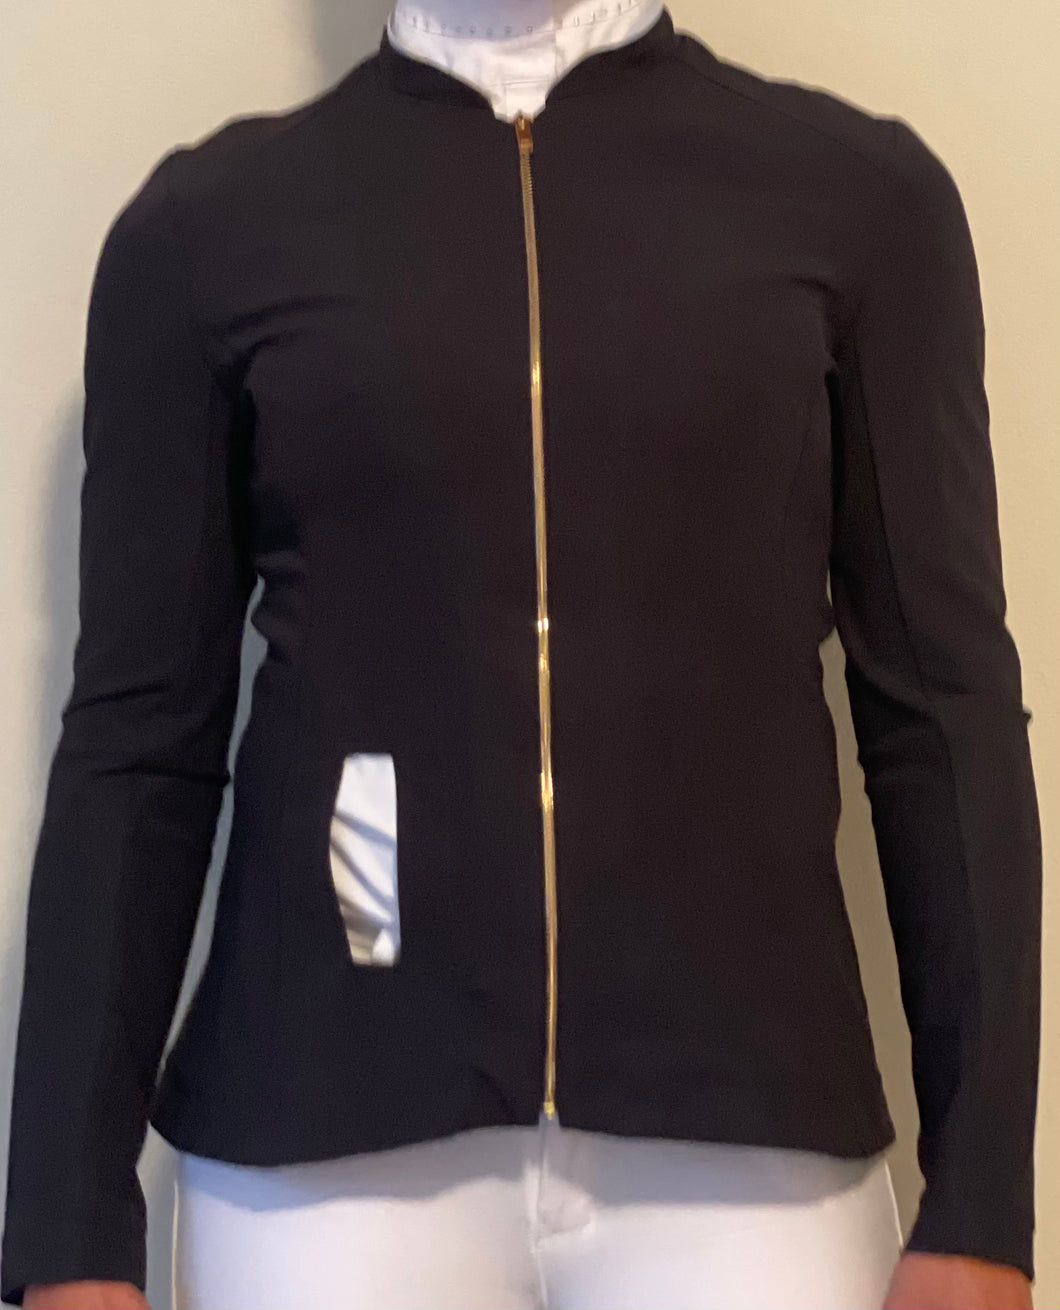 Women’s Dada Darco Airbag Show Jacket (Small) New with Tags